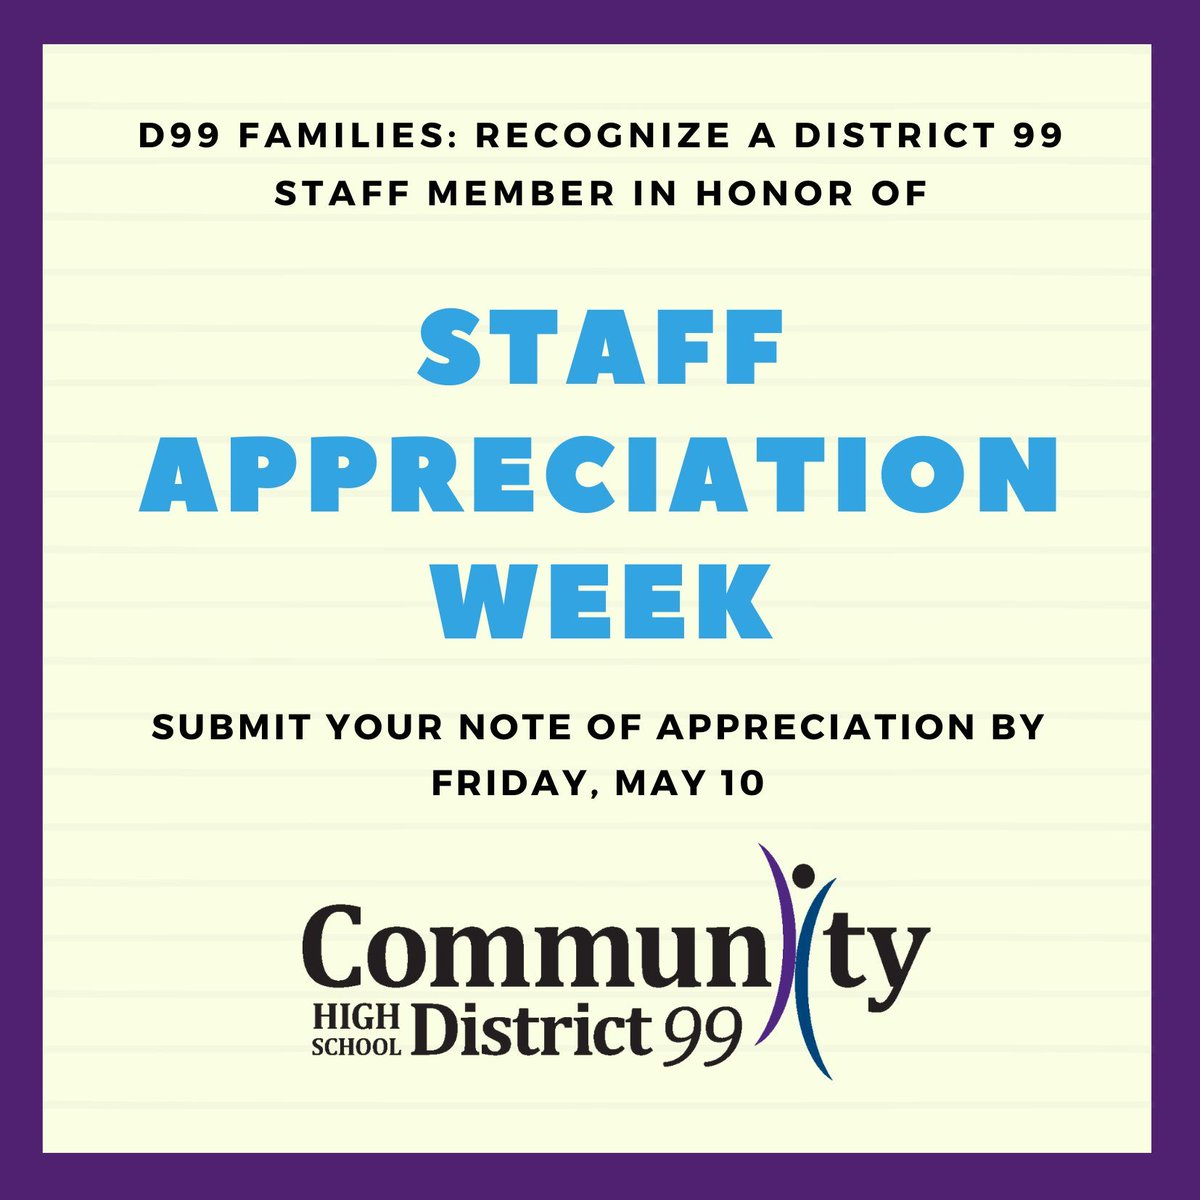 With only two weeks left in the school year, we encourage your family to reflect upon those within District 99 who have made a positive impact on your student’s experience. Submit your note of appreciation by this Friday, May 10: buff.ly/3TKx6Gj #99learns